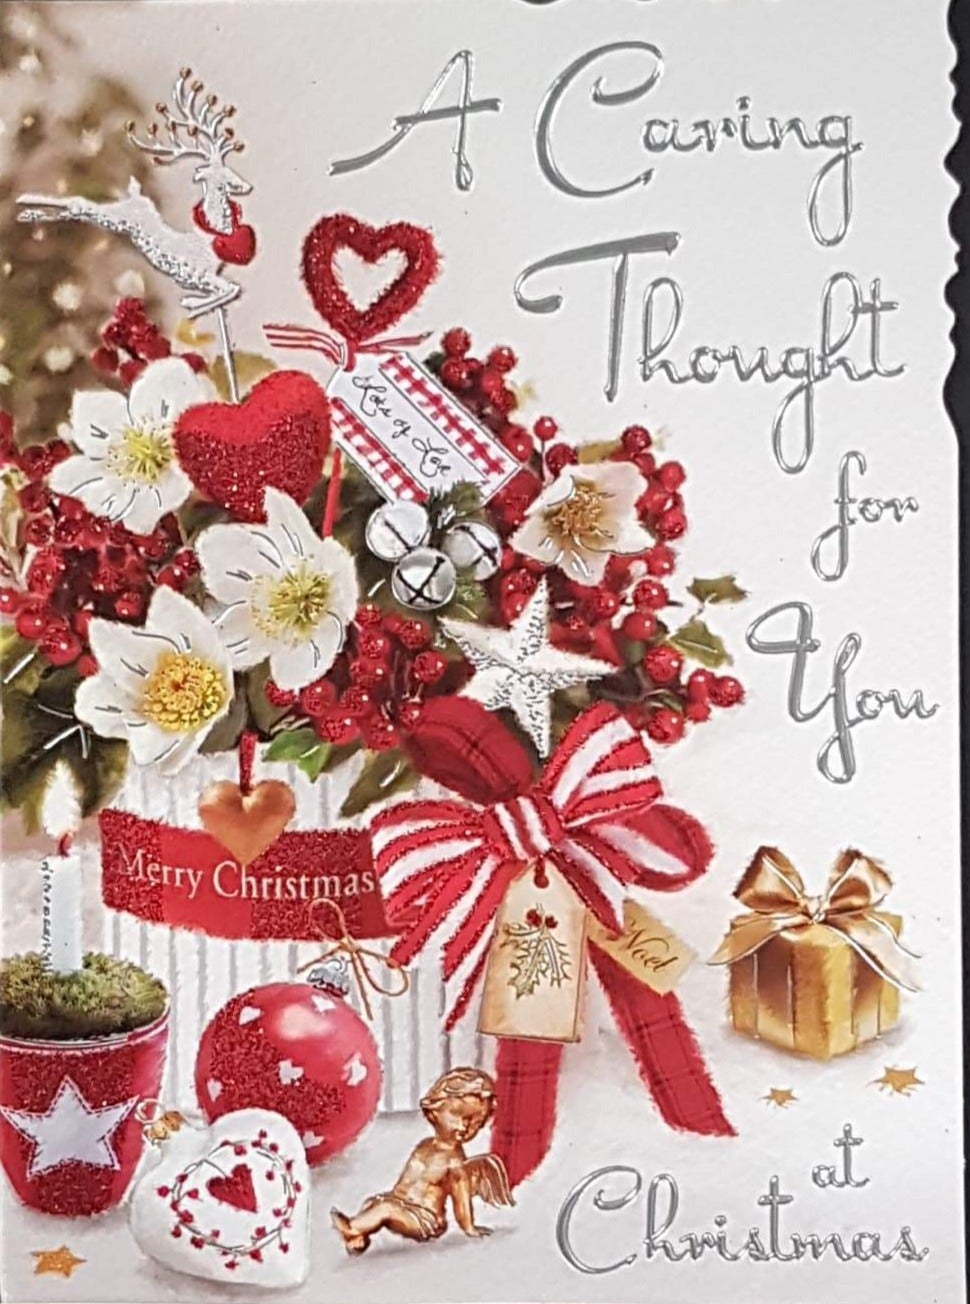 Thinking of You Christmas Card - A Caring Thought For You & Flowers & Berries in Basket